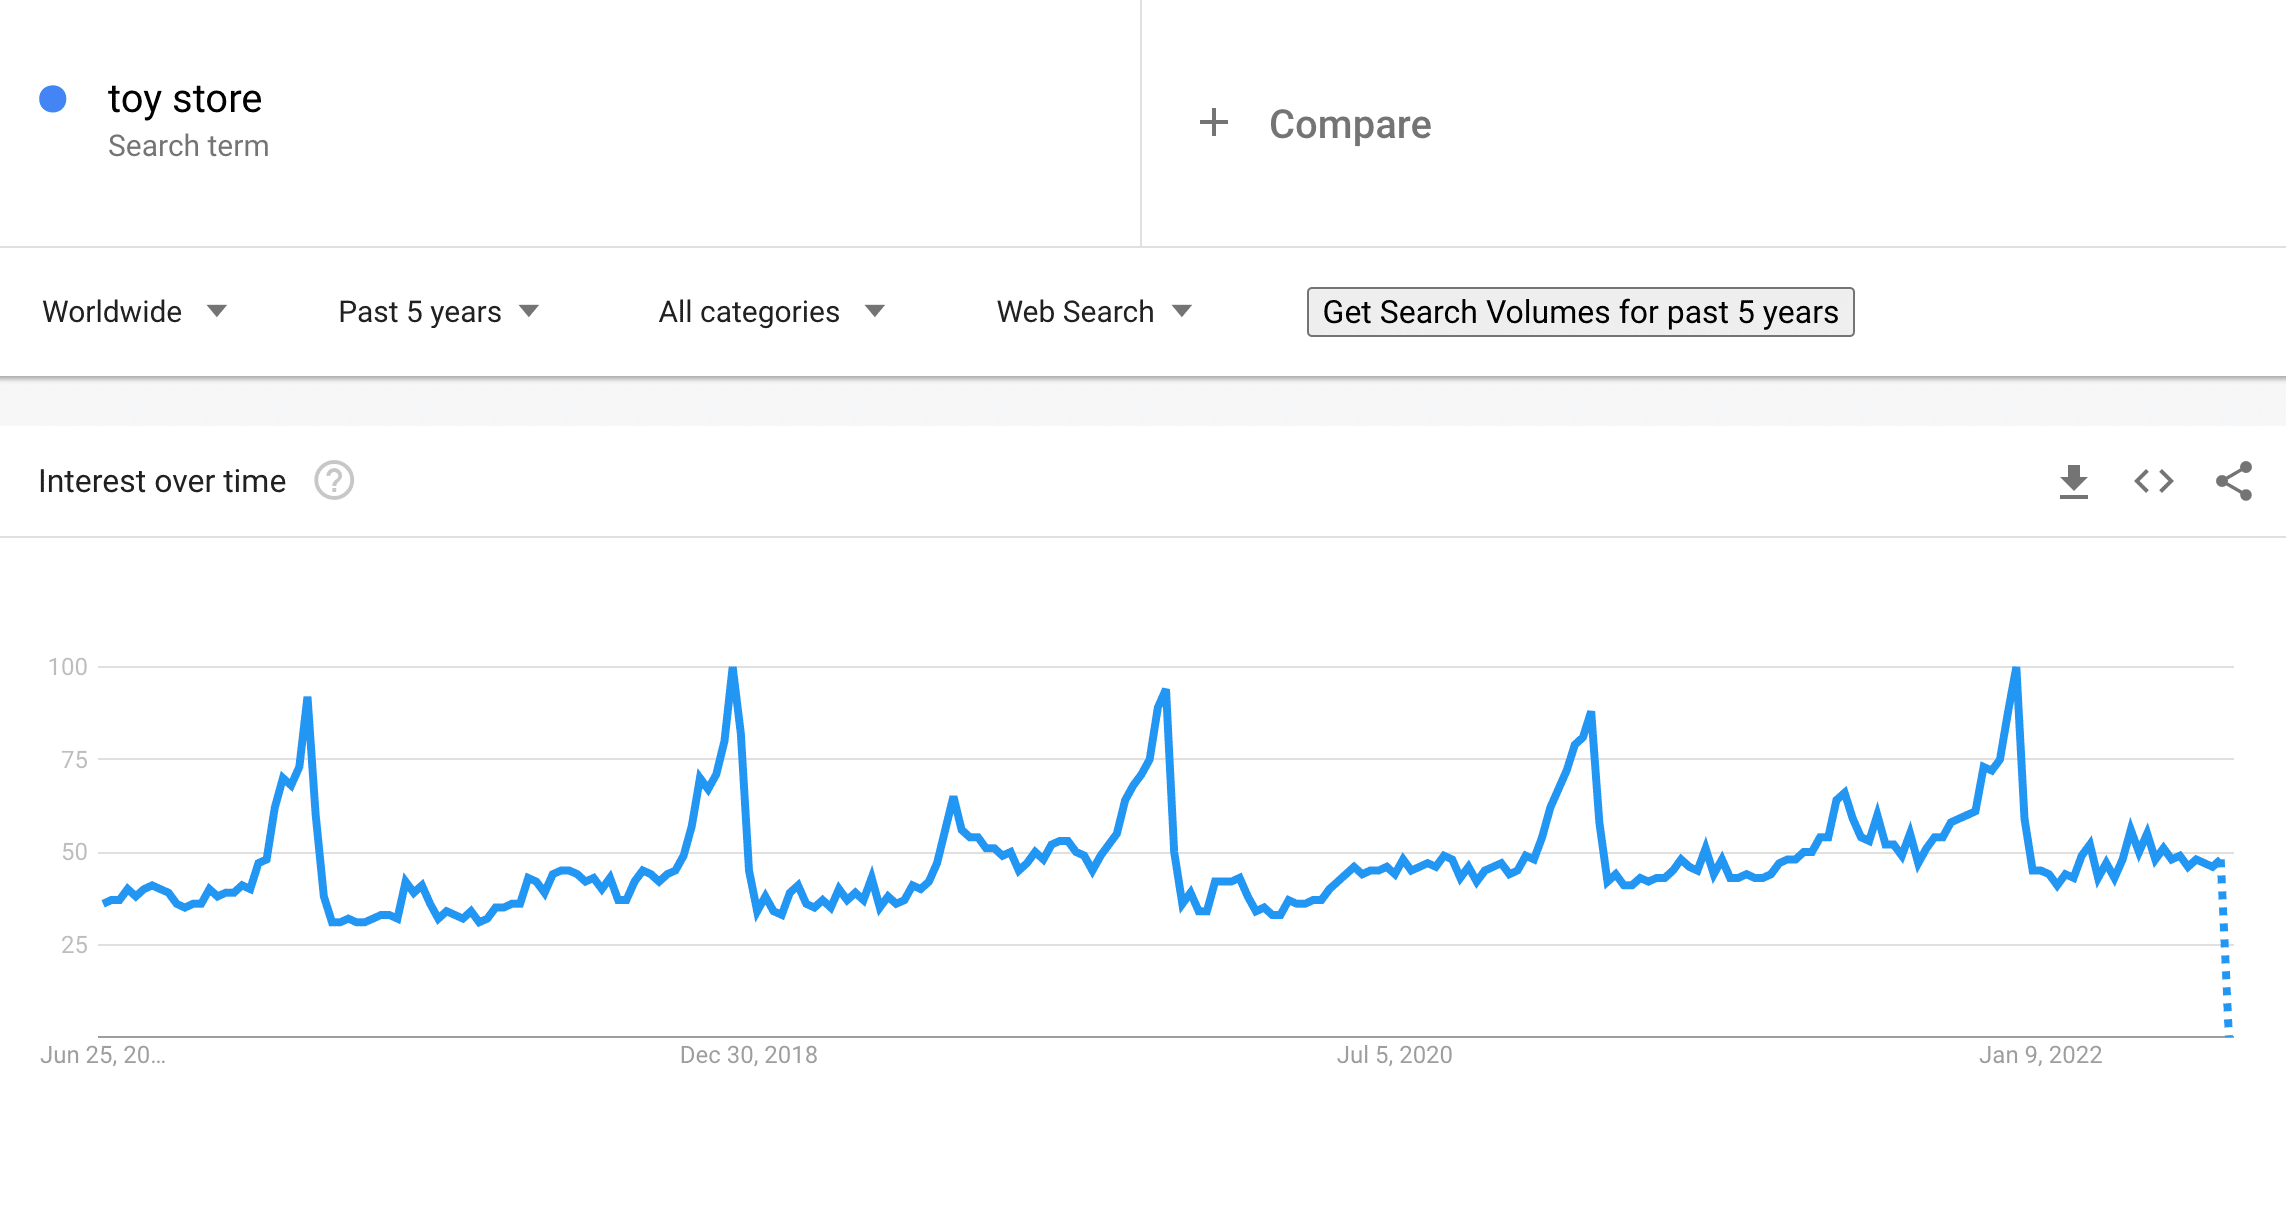 Toy store on Google Trends